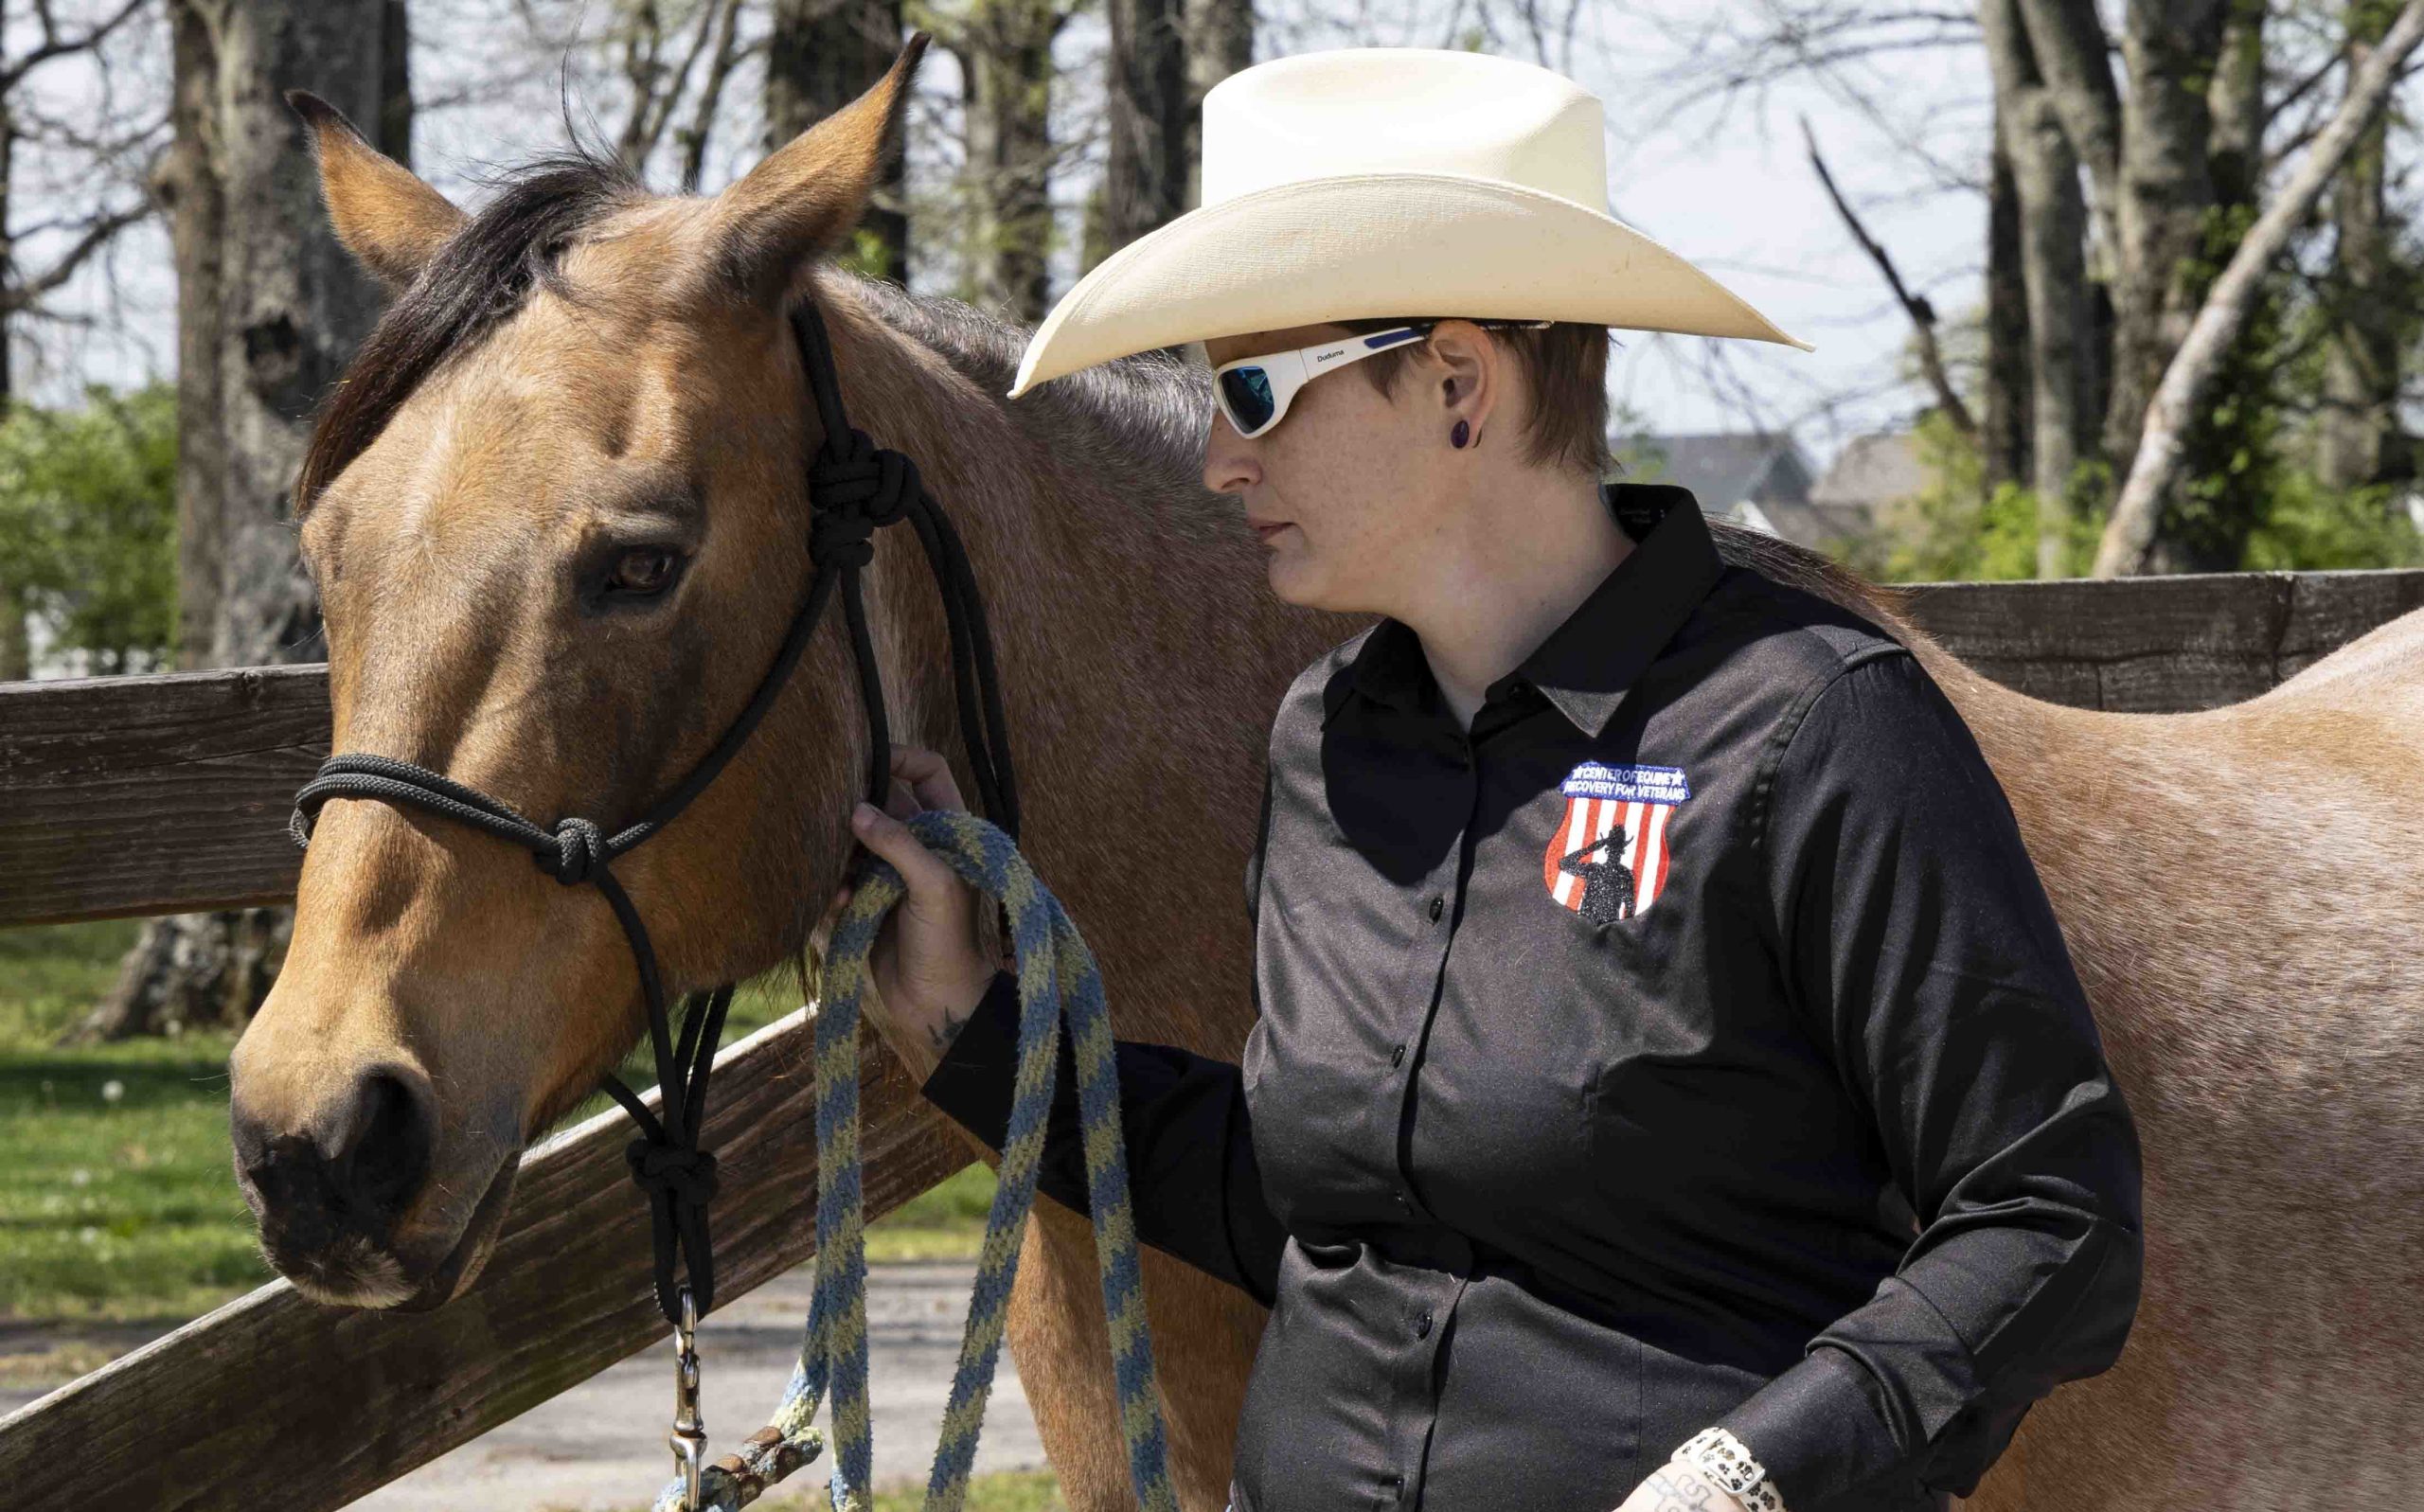 Continue reading Veterans find healing working with horses